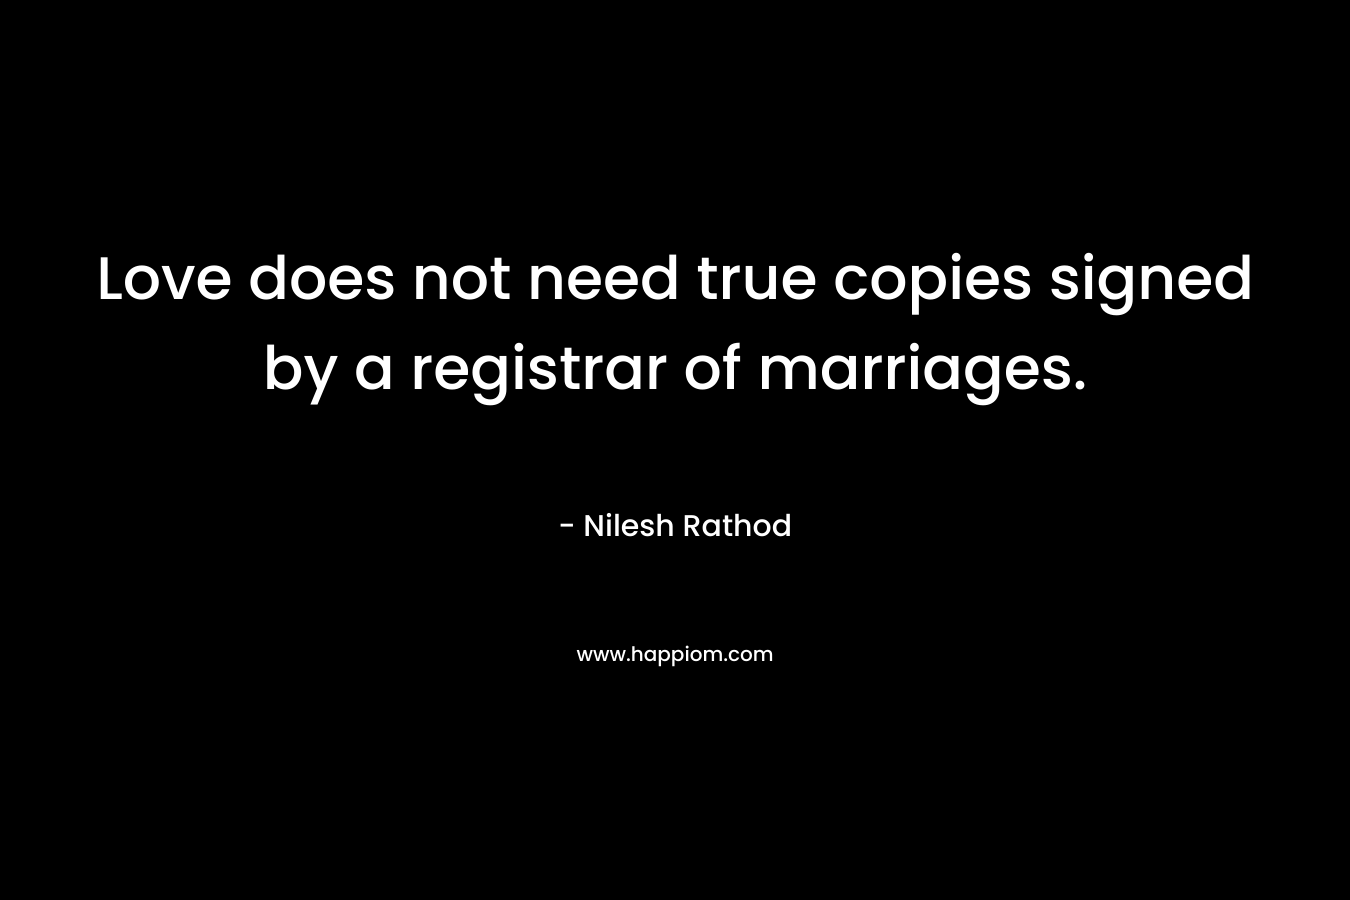 Love does not need true copies signed by a registrar of marriages.